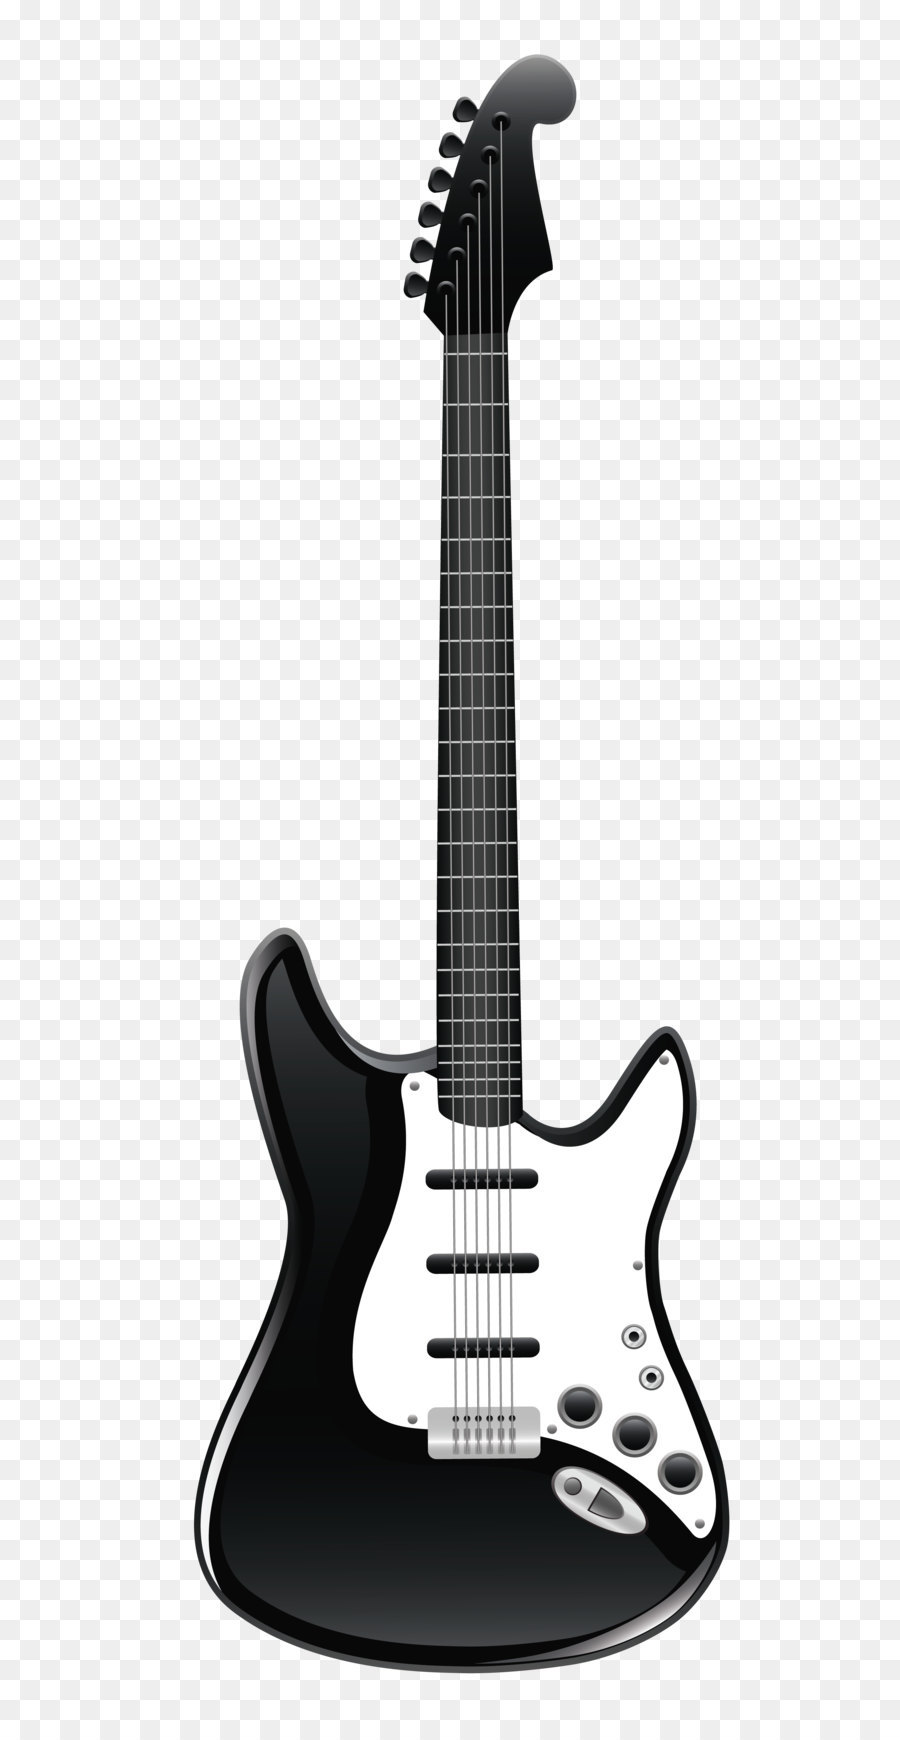 Guitar Clip art - Black and White Guitar PNG Clipart png download - 2006*5328 - Free Transparent  png Download.